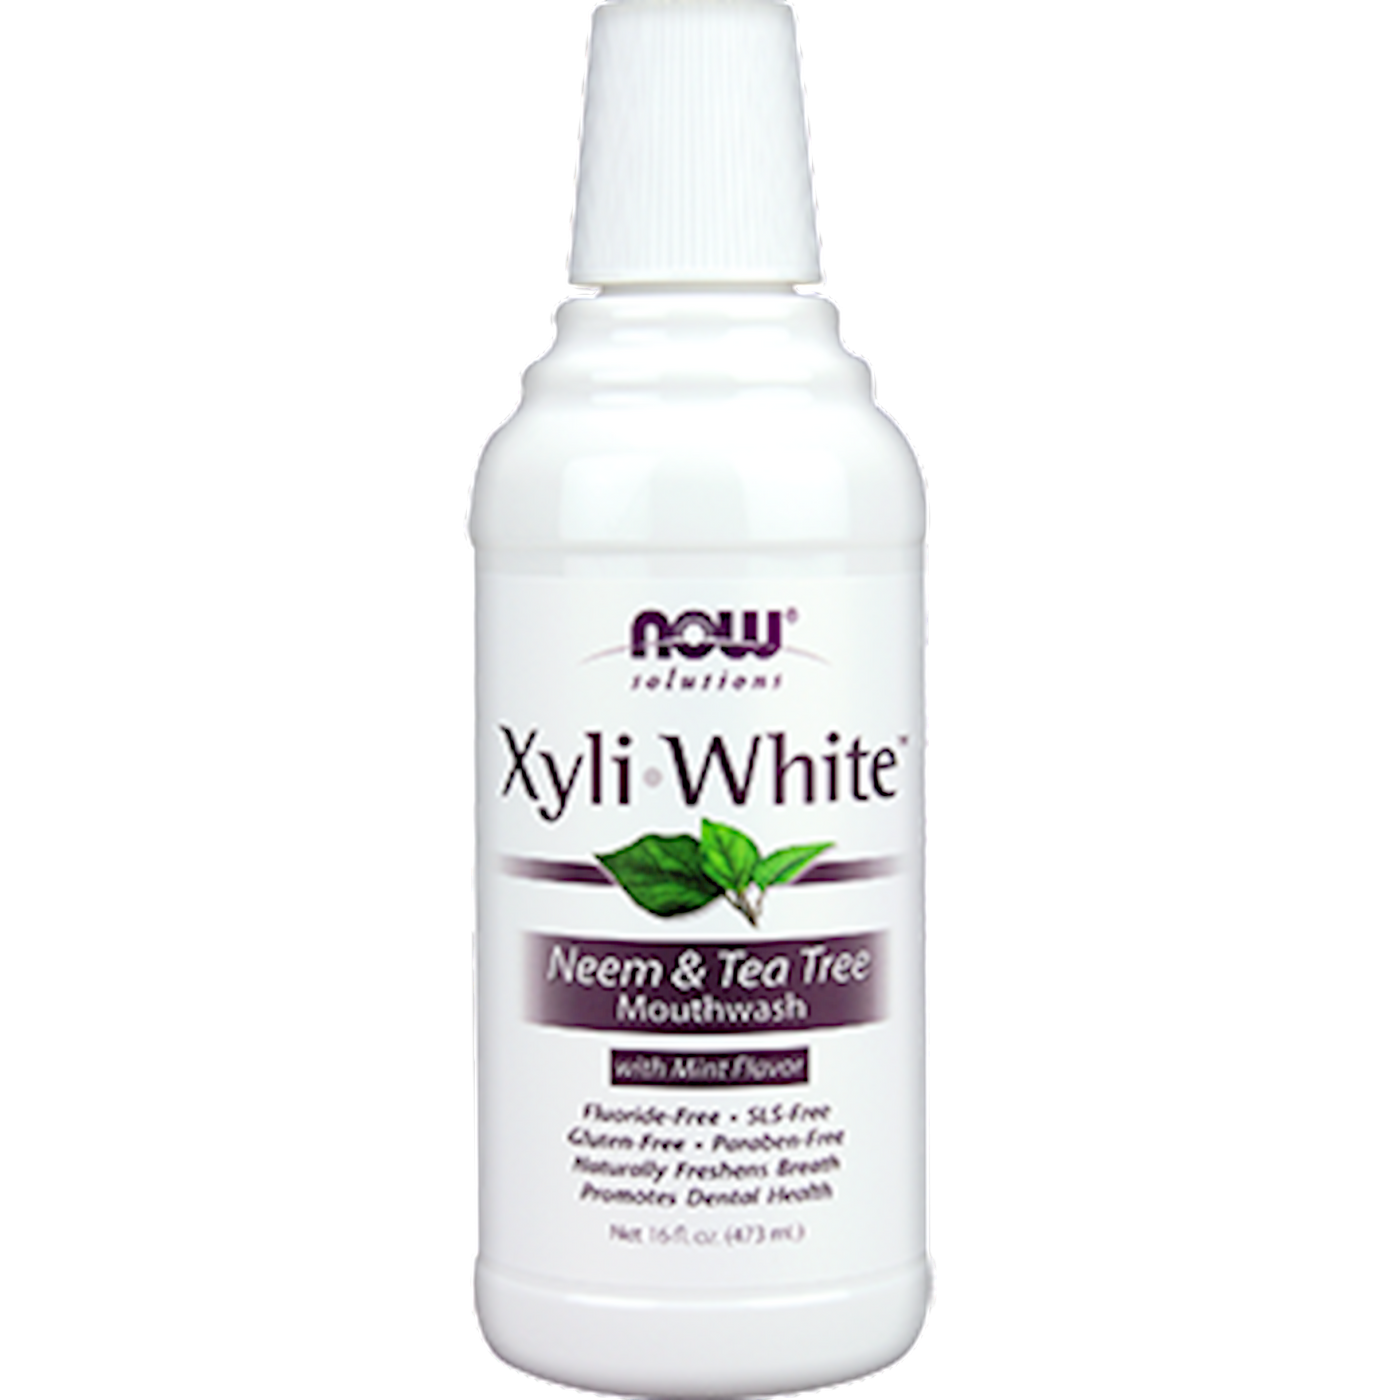 Xyliwhite Neem & Tea Tree Mouthwash 16oz Curated Wellness